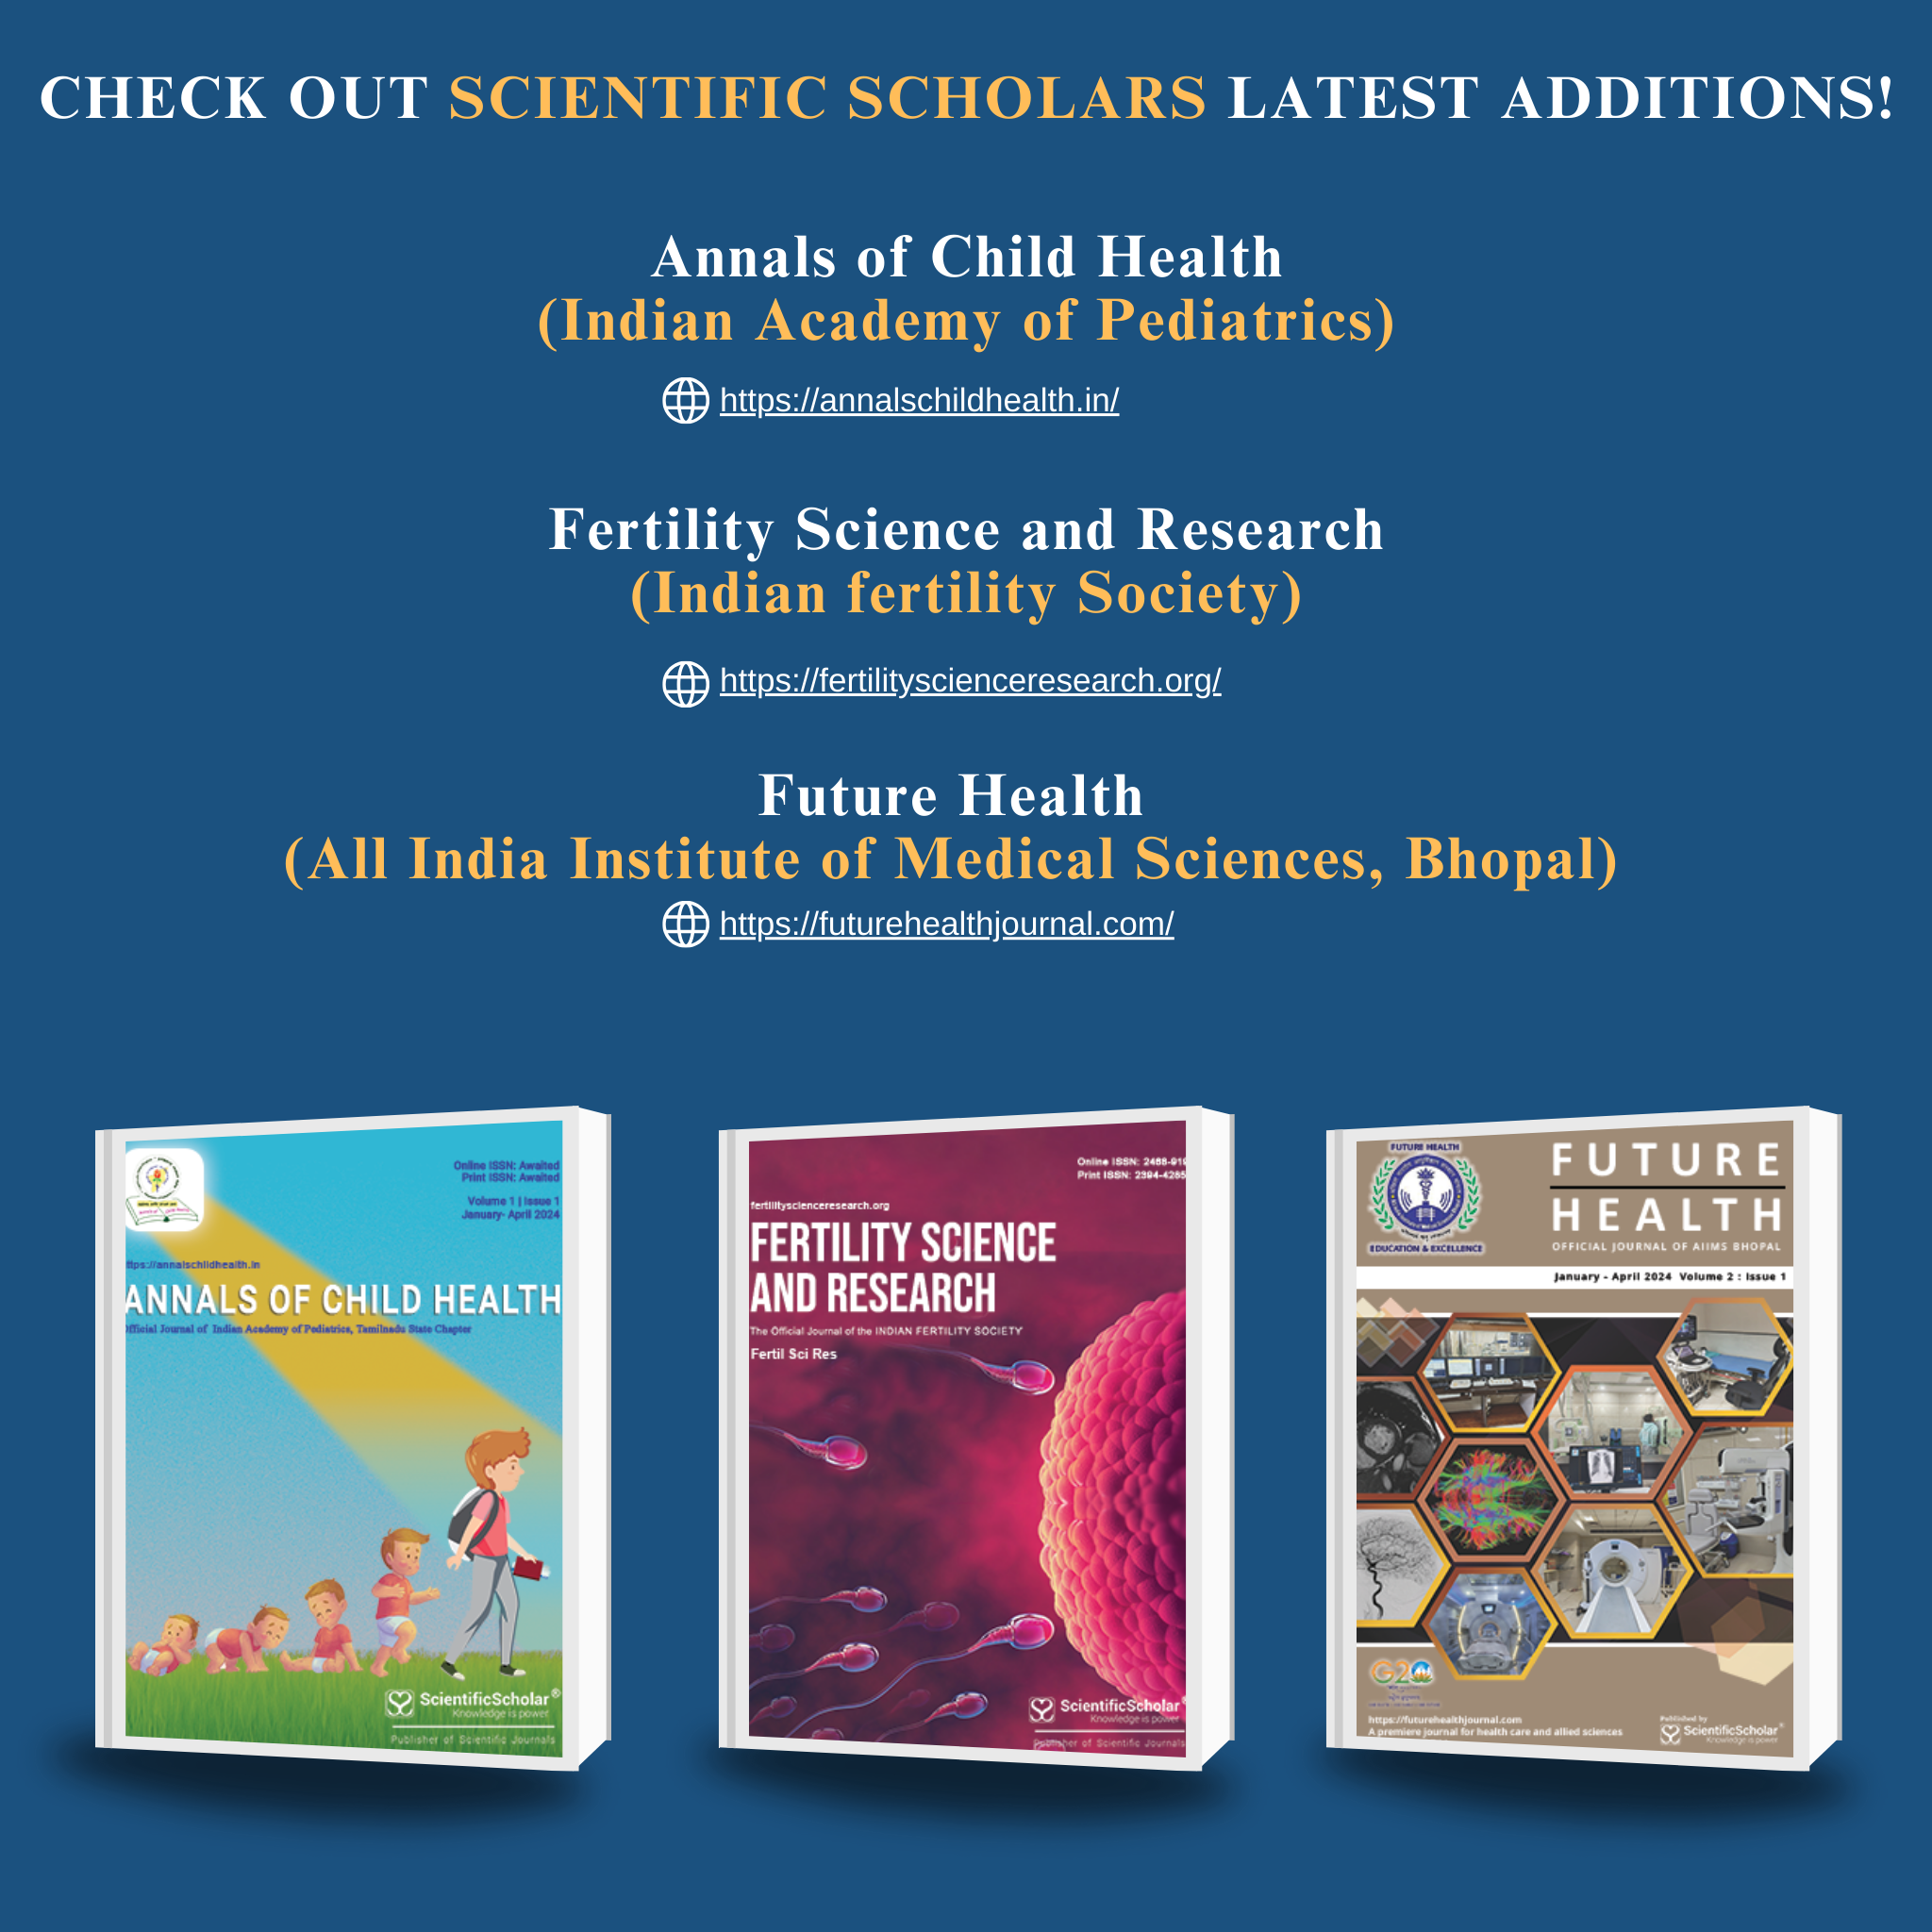 Check Out Scientific Scholars Latest Additions of Journals ACH, FSR, FH